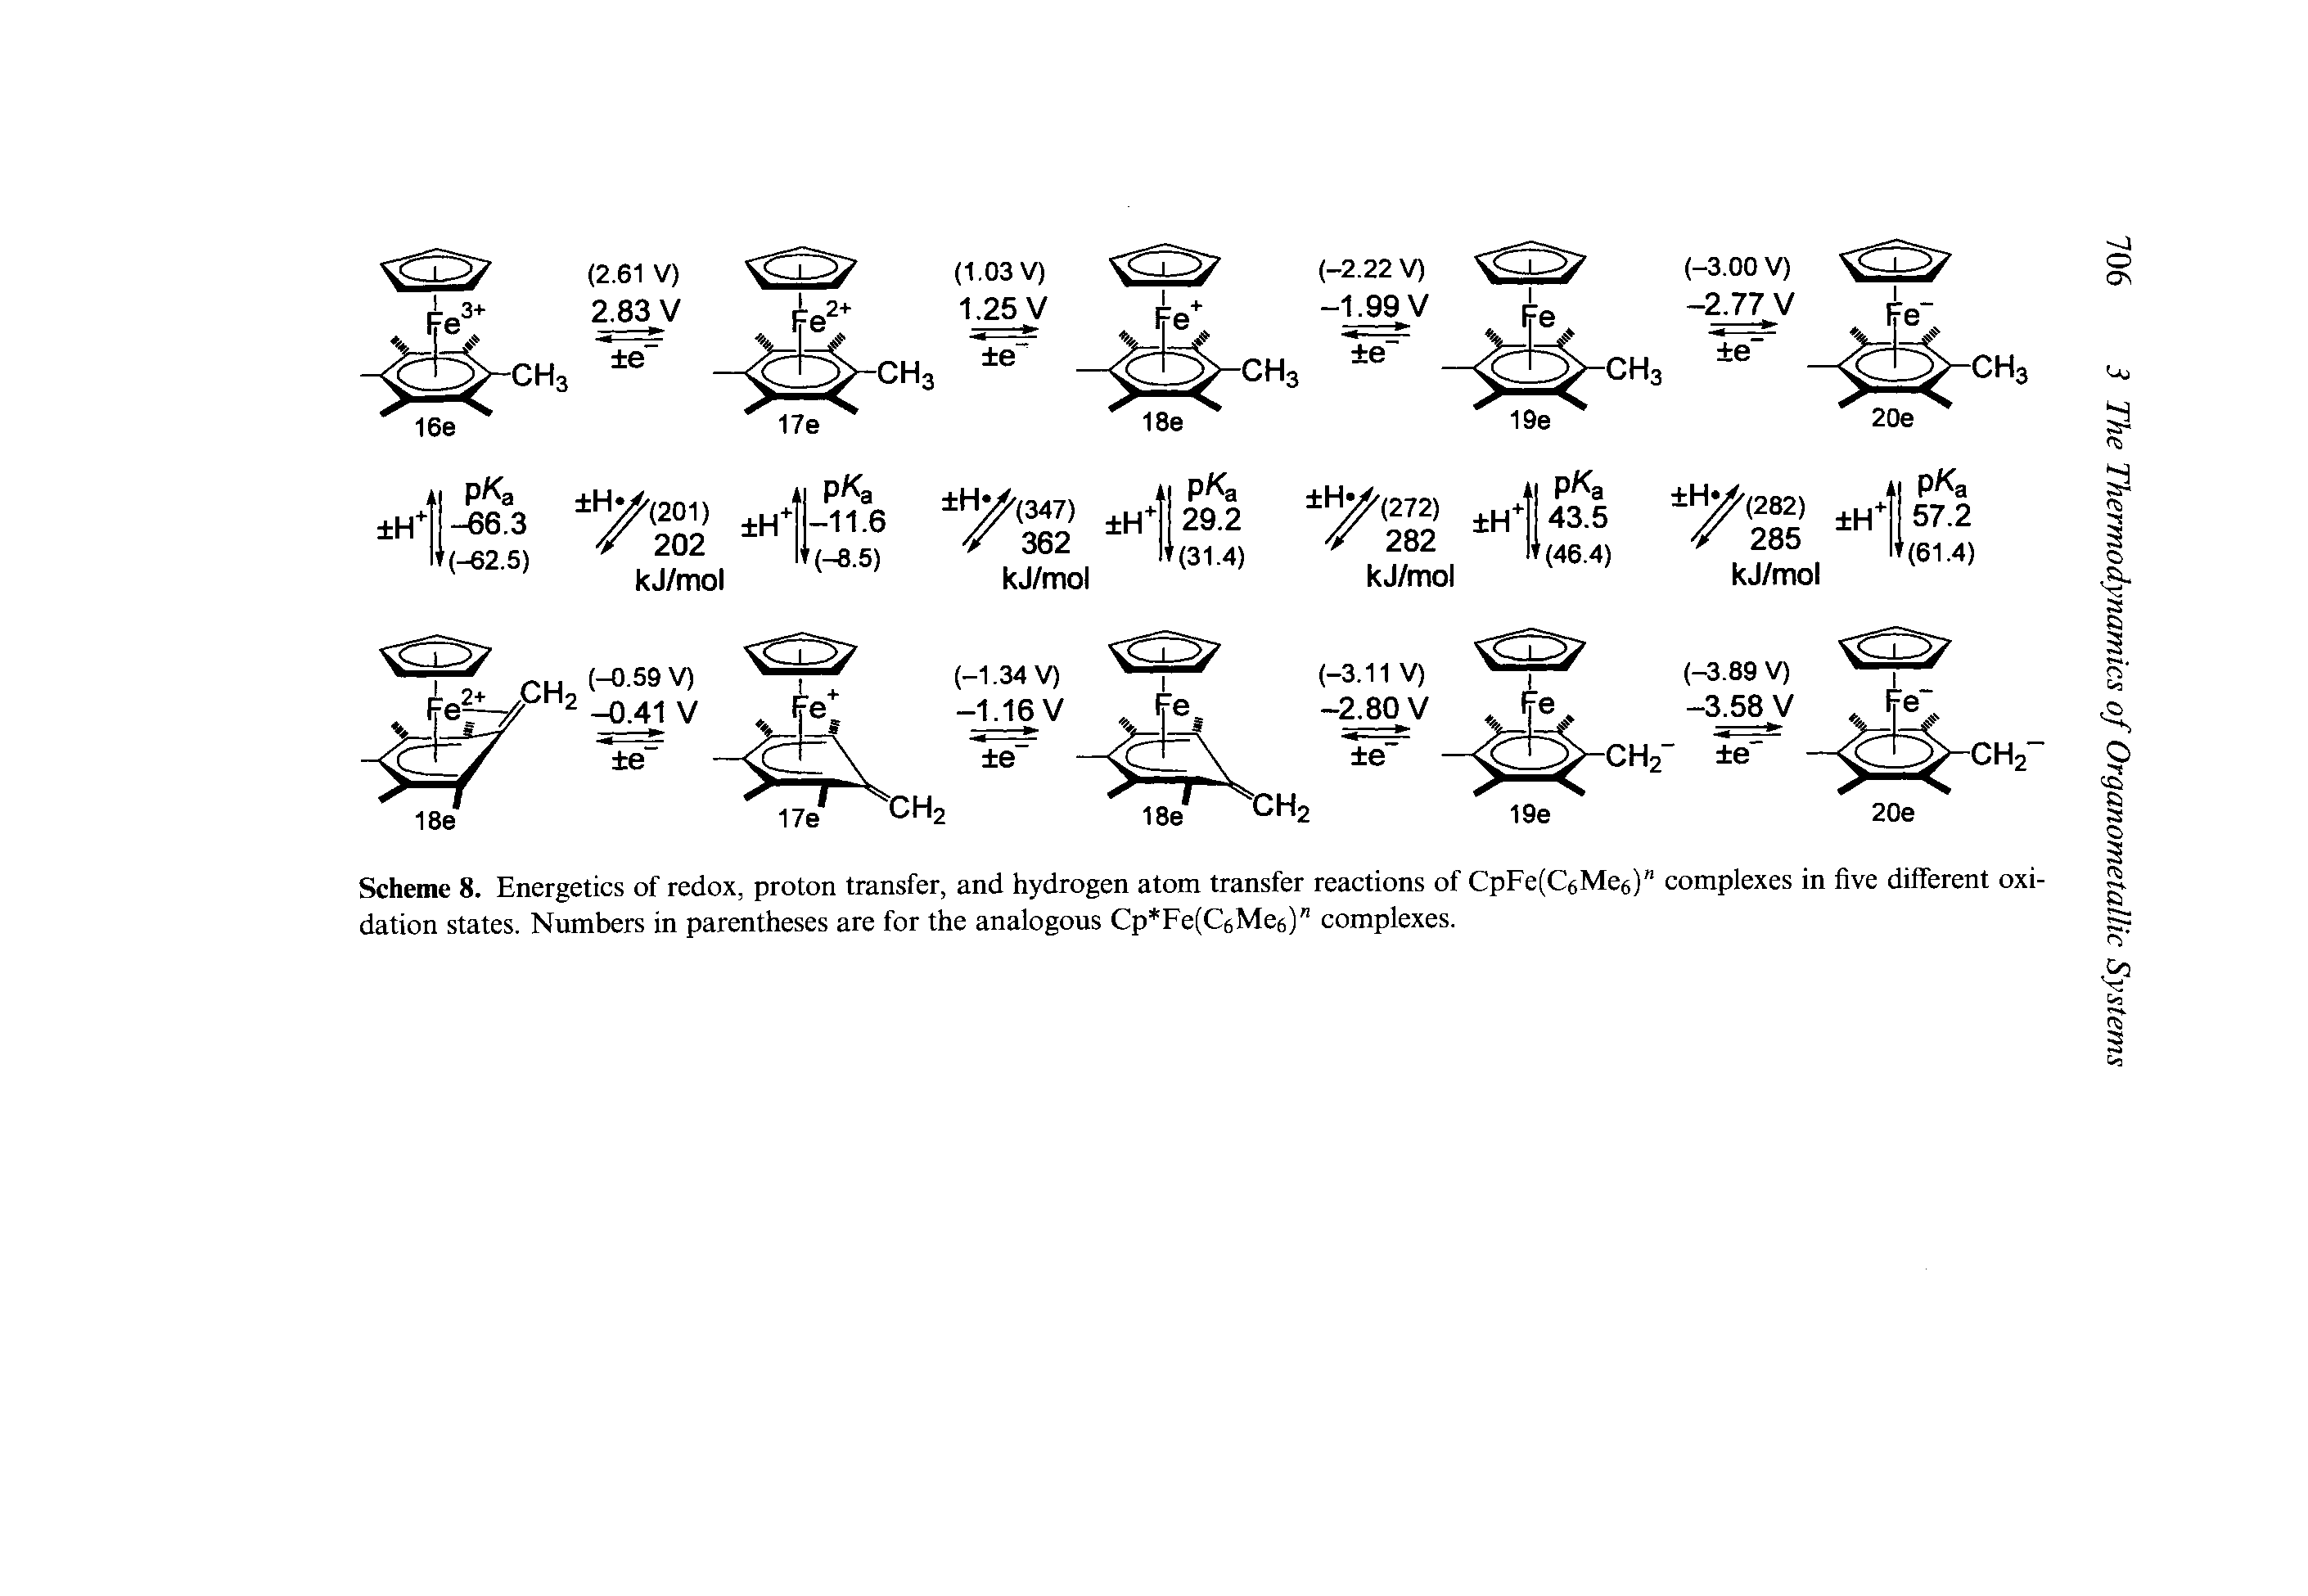 Scheme 8. Energetics of redox, proton transfer, and hydrogen atom transfer reactions of CpFe(C6Me6)" complexes in five different oxidation states. Numbers in parentheses are for the analogous Cp Fe(C6Me6)" complexes.